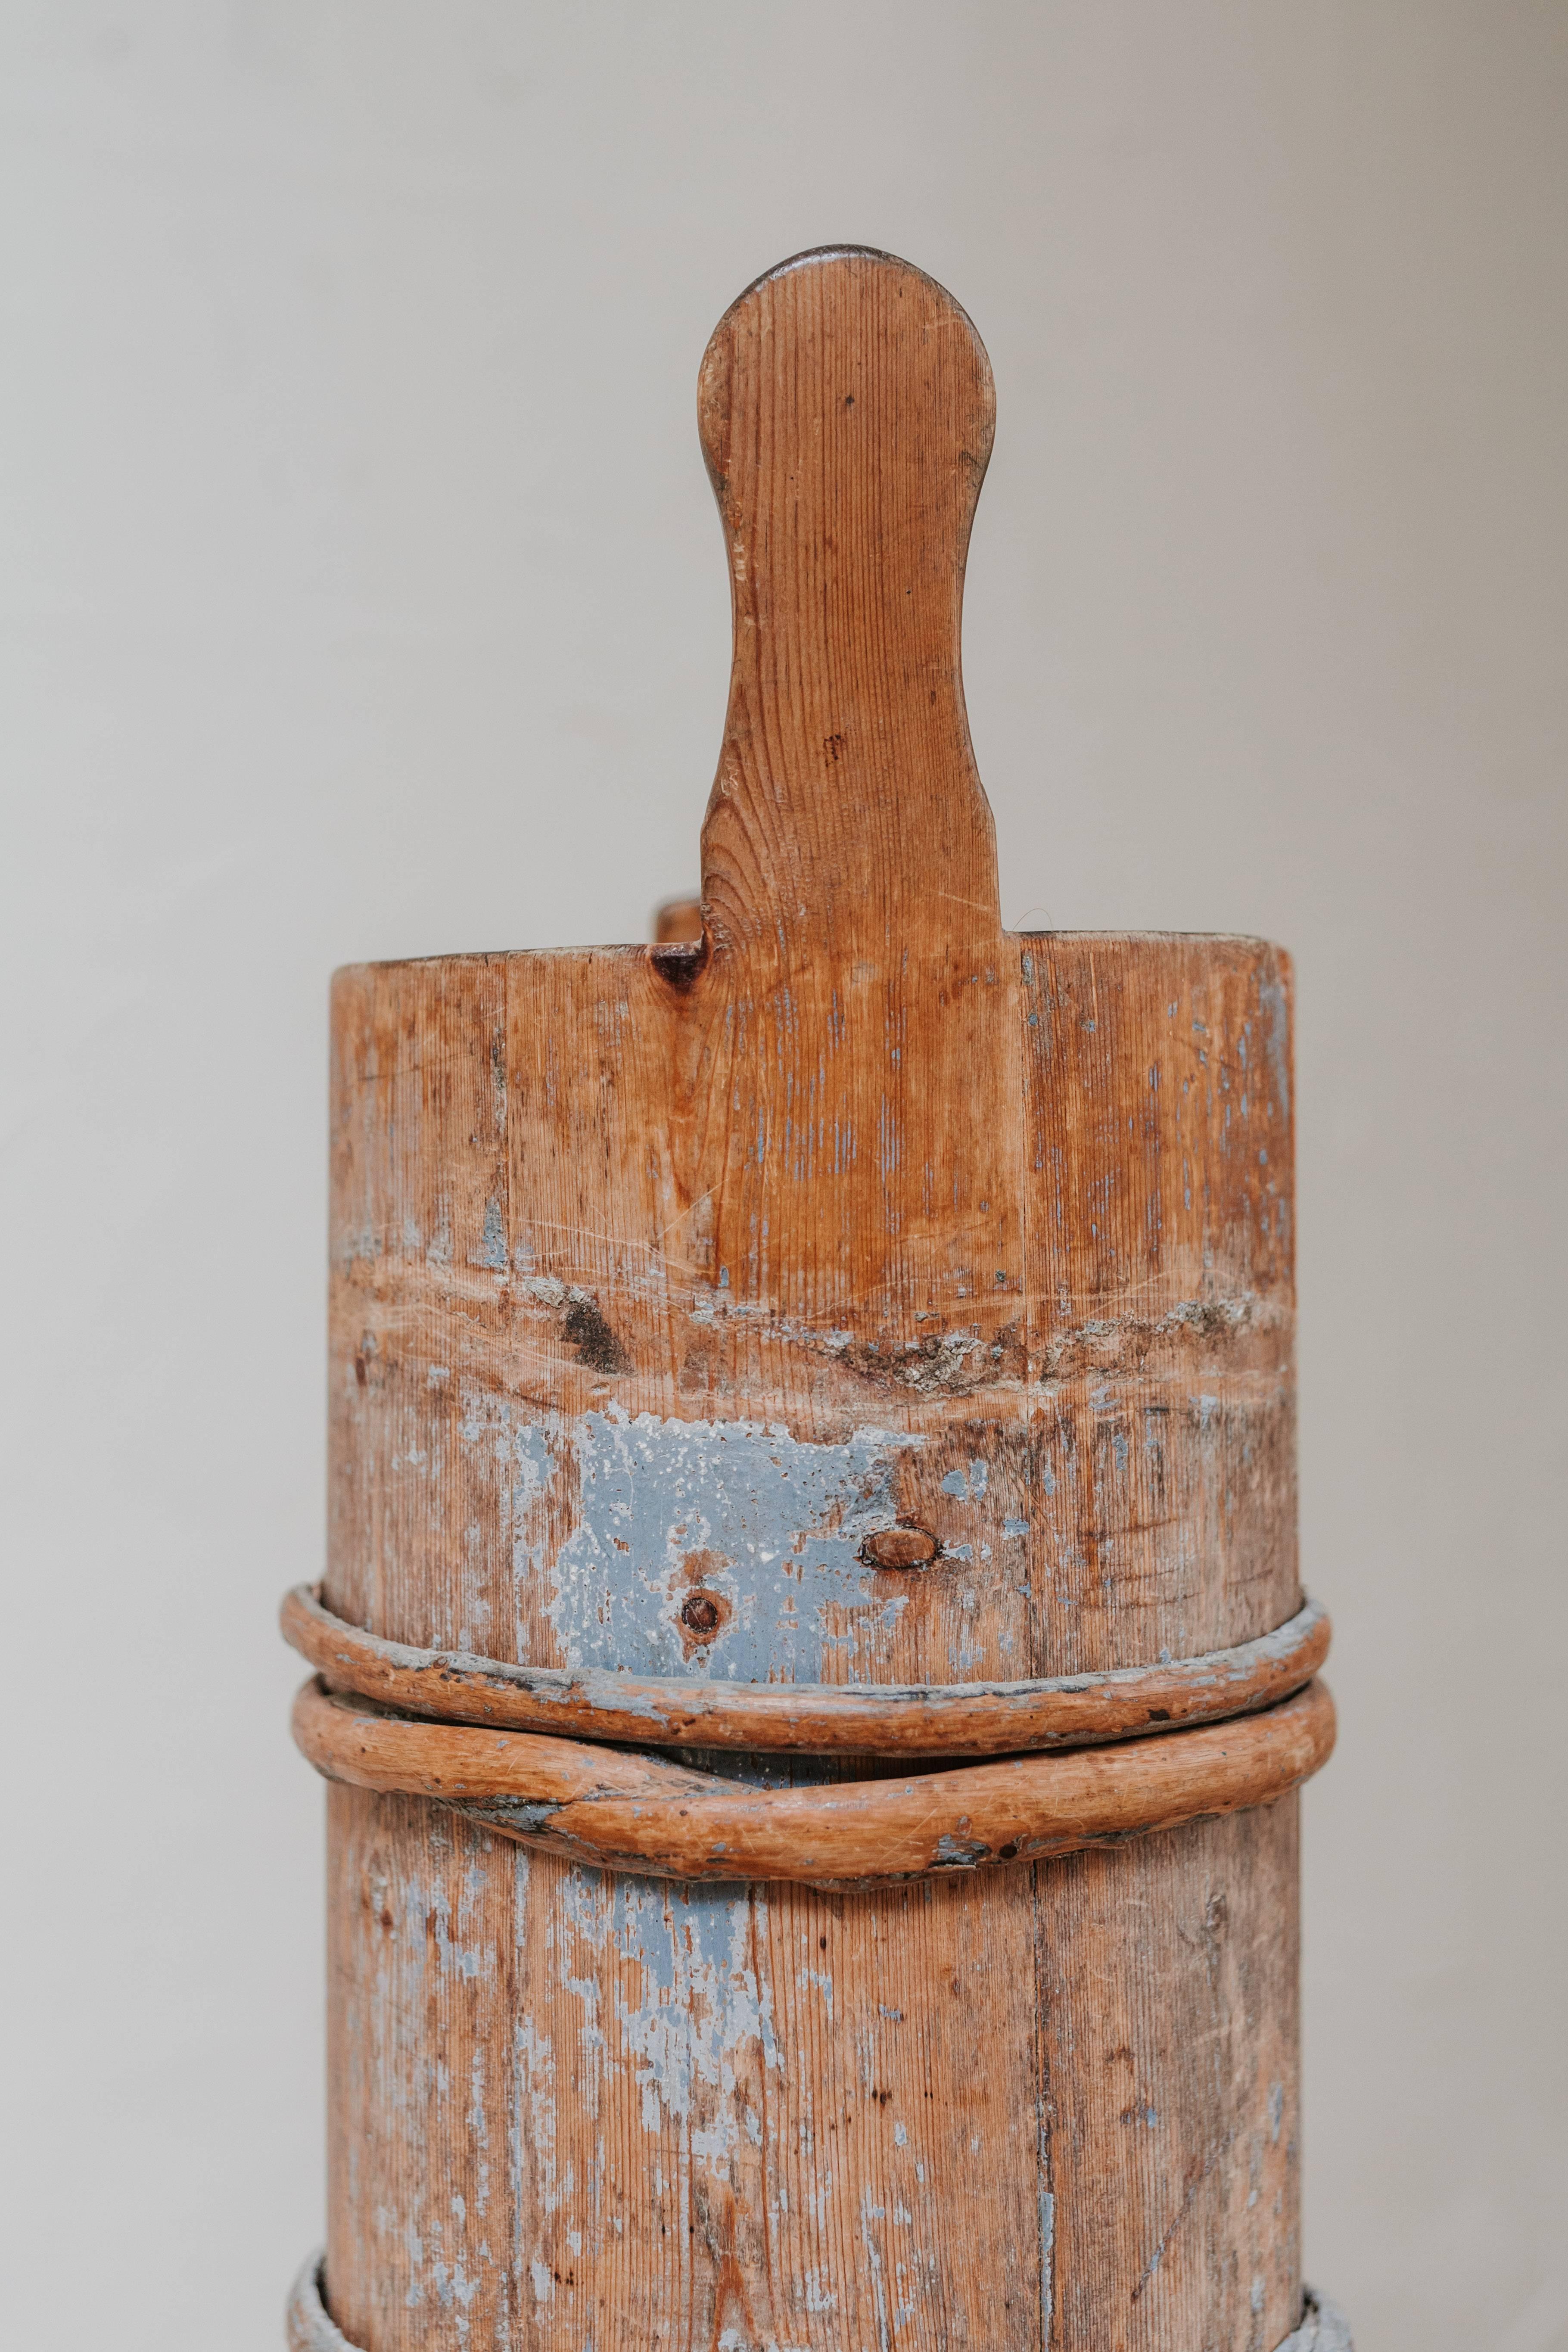 this is a 19th century, Swedish buttermaker, with rests of old blue paint, here used as a cane/umbrellastand.